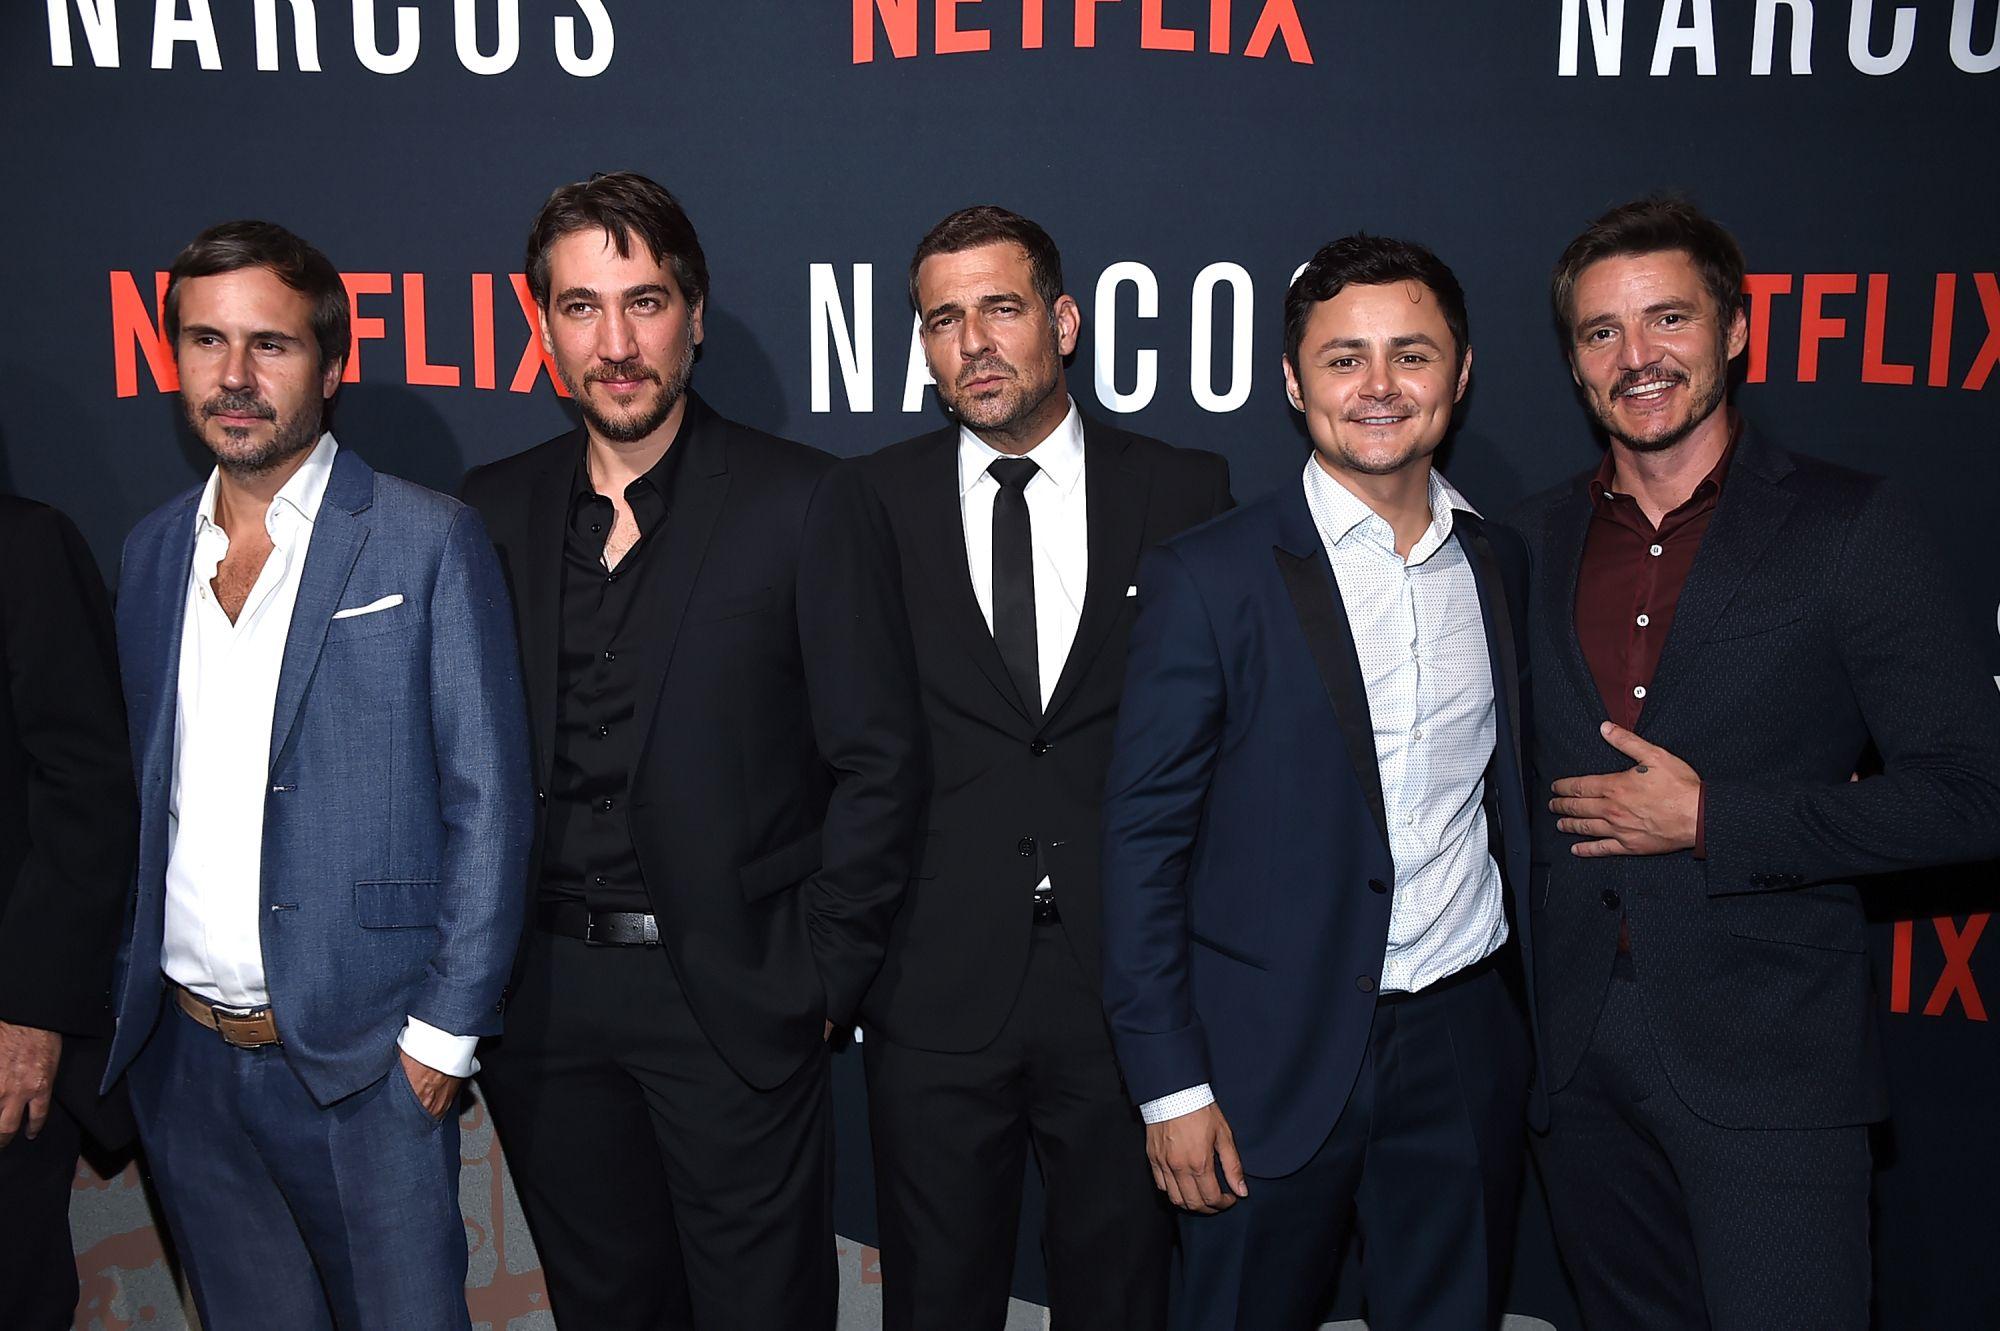 Narcos' Cast Say First Episode Will Leave Fans in Shock